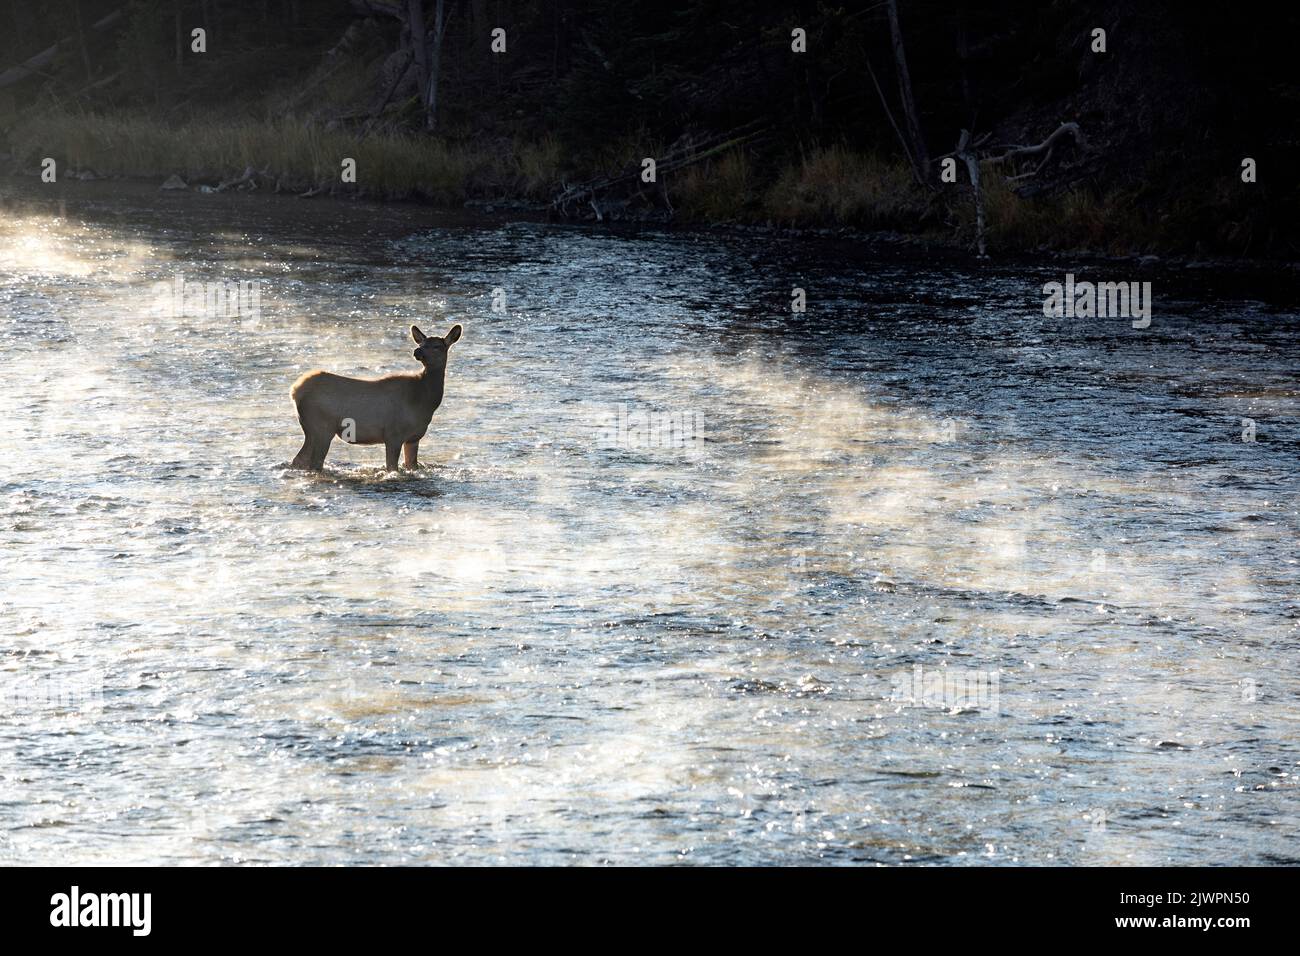 WY05031-00....WYOMING - Young elk in the Madison River, Yellowstone National Park. Stock Photo